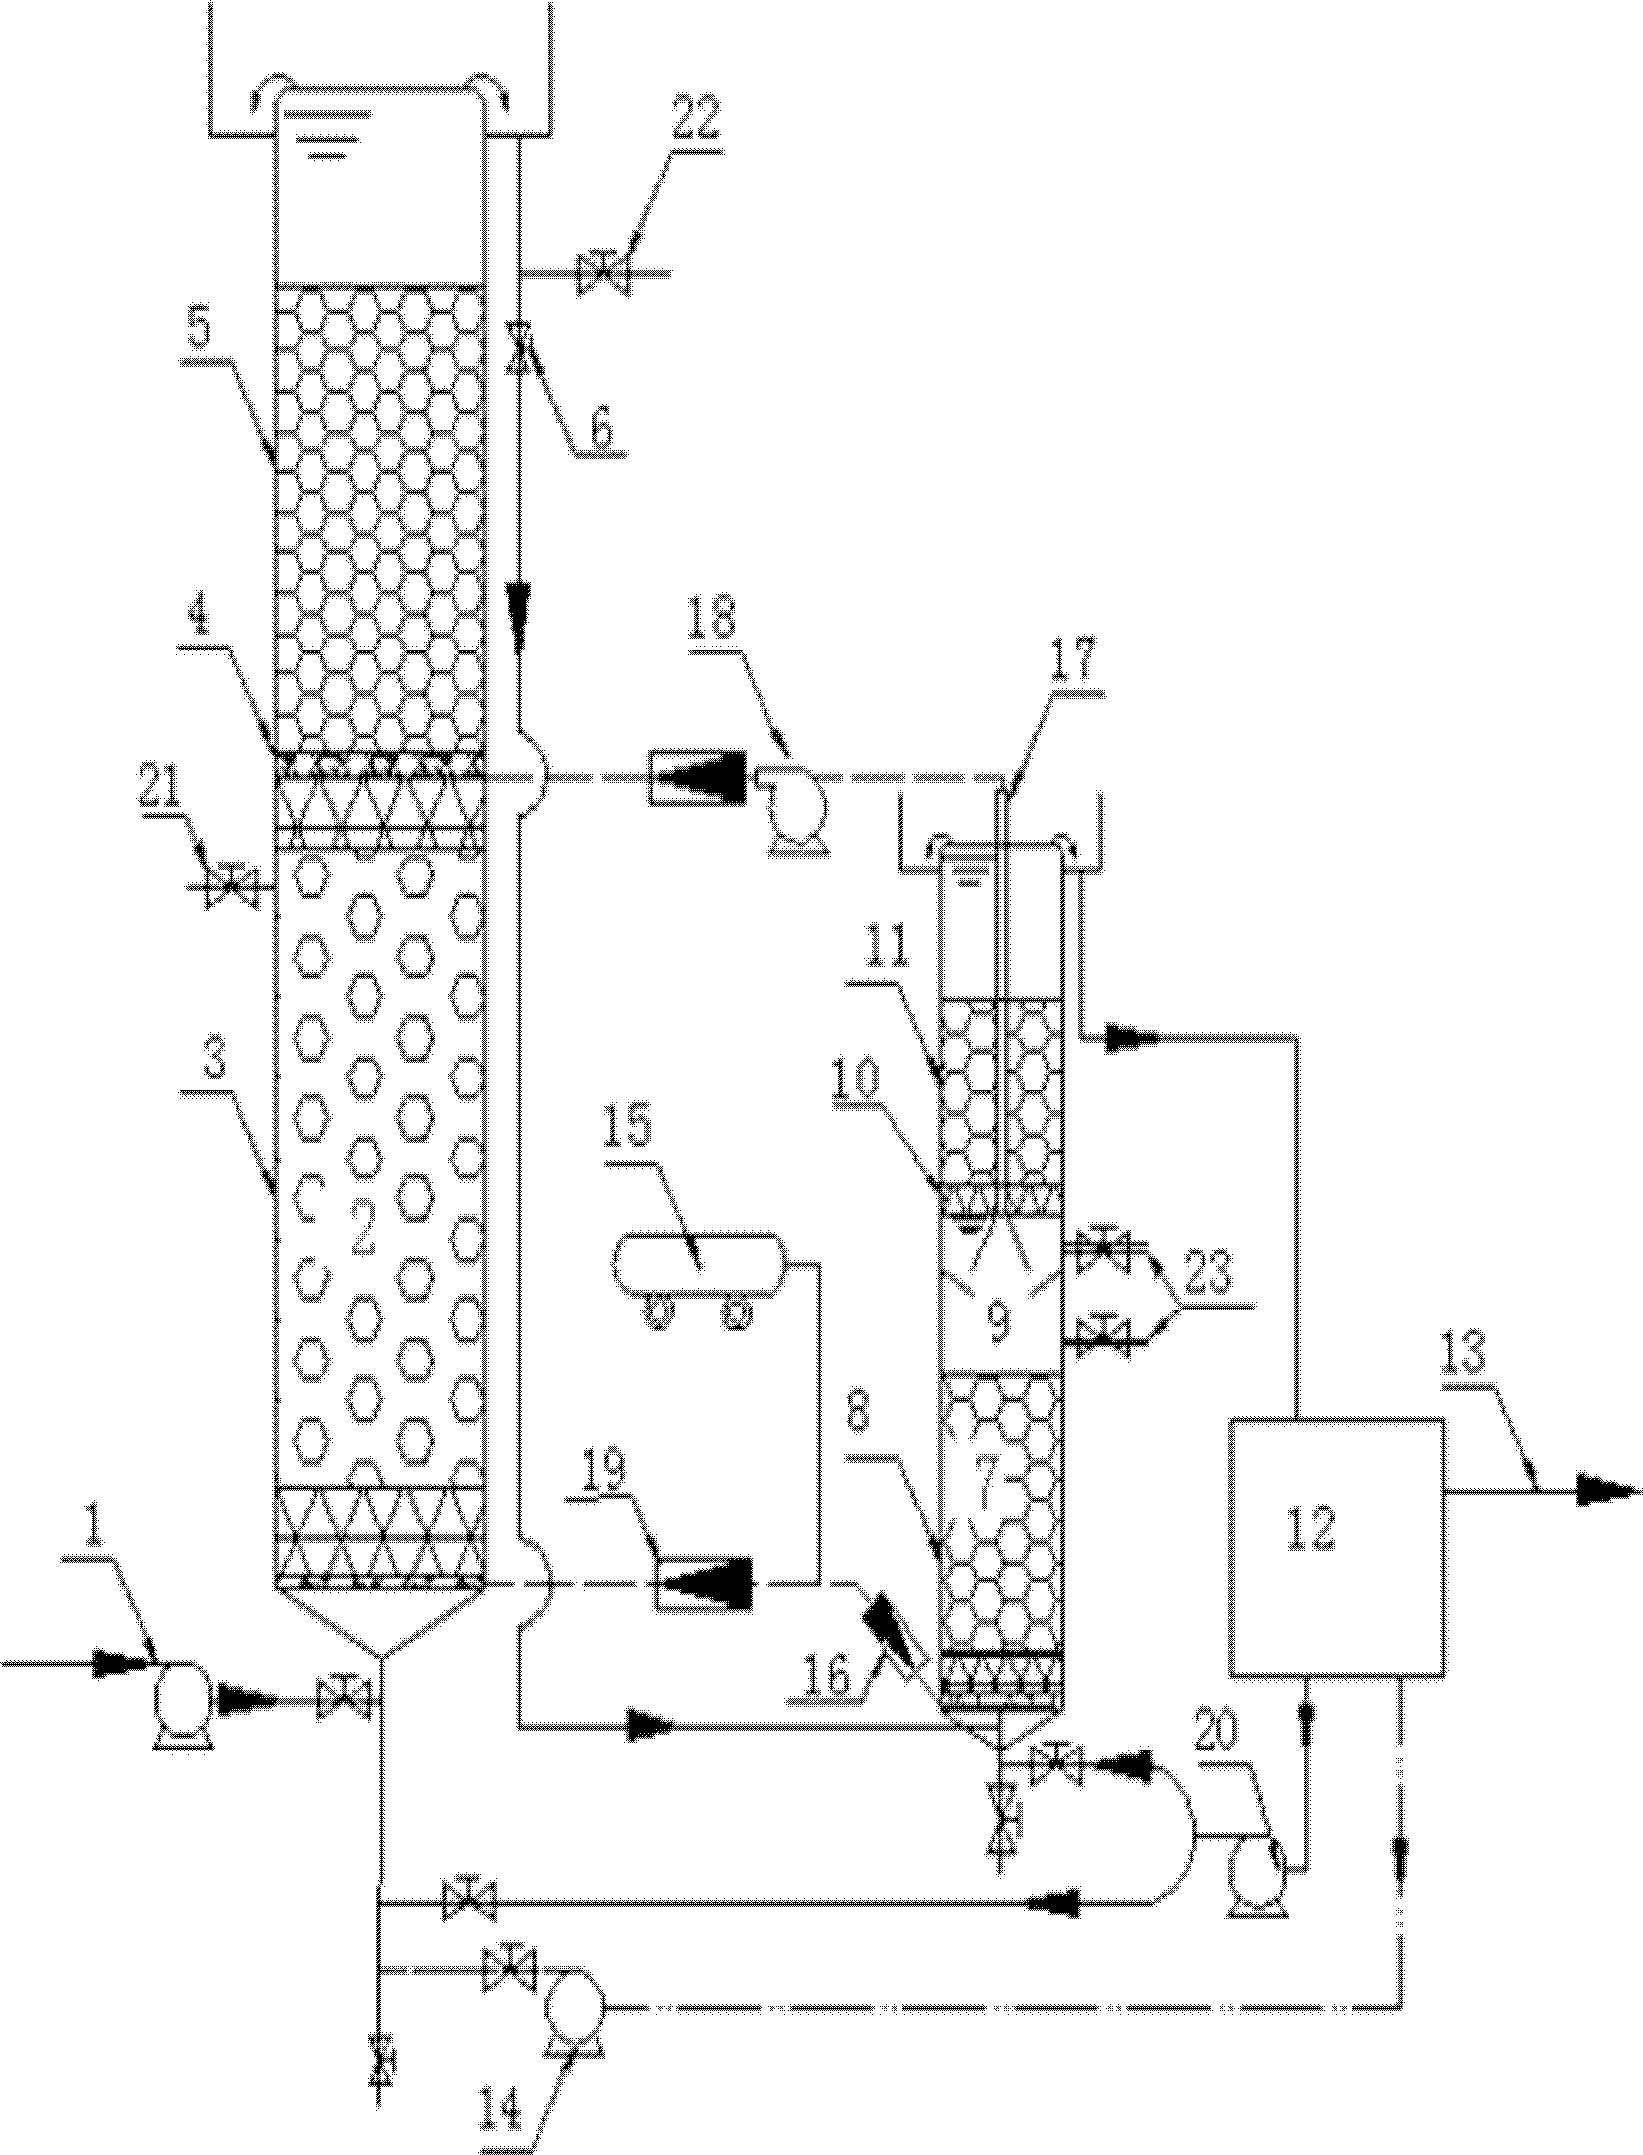 Nitration denitrificatoin and filter method and nitration denitrification and filter device for double-sludge series-connection aeration biofilter